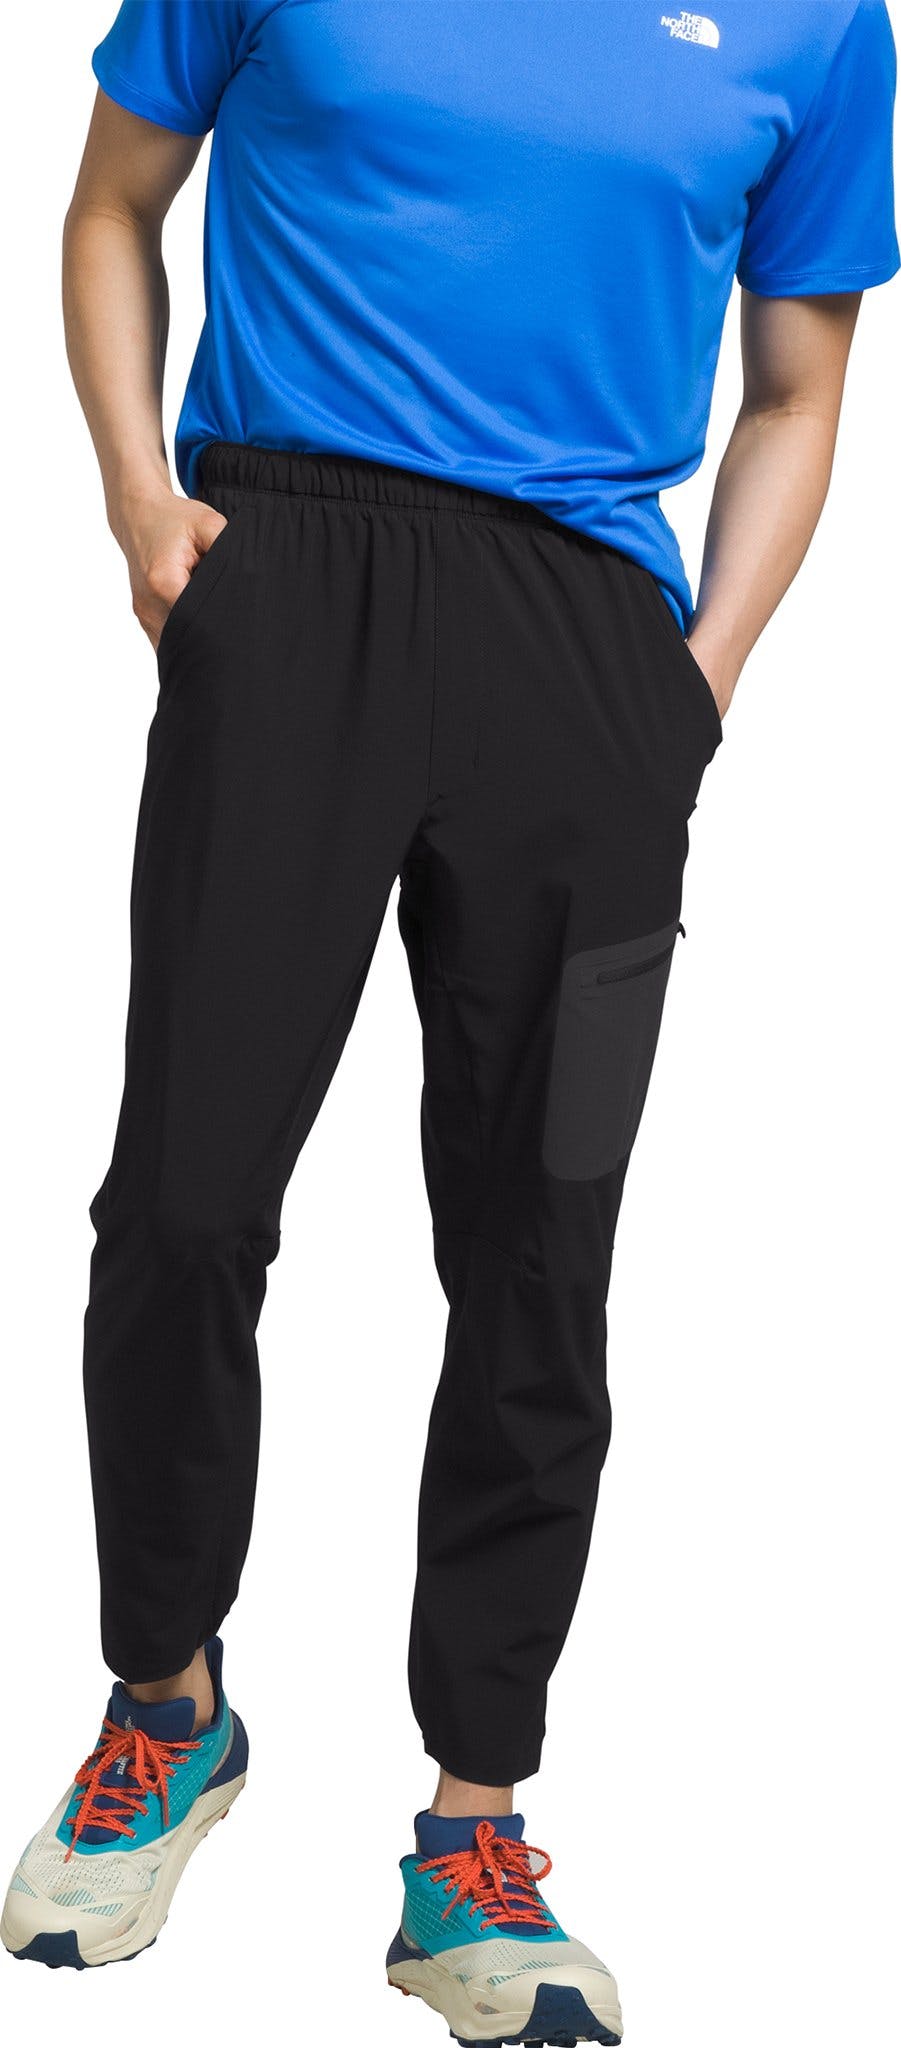 Product image for Lightstride Pant - Men's